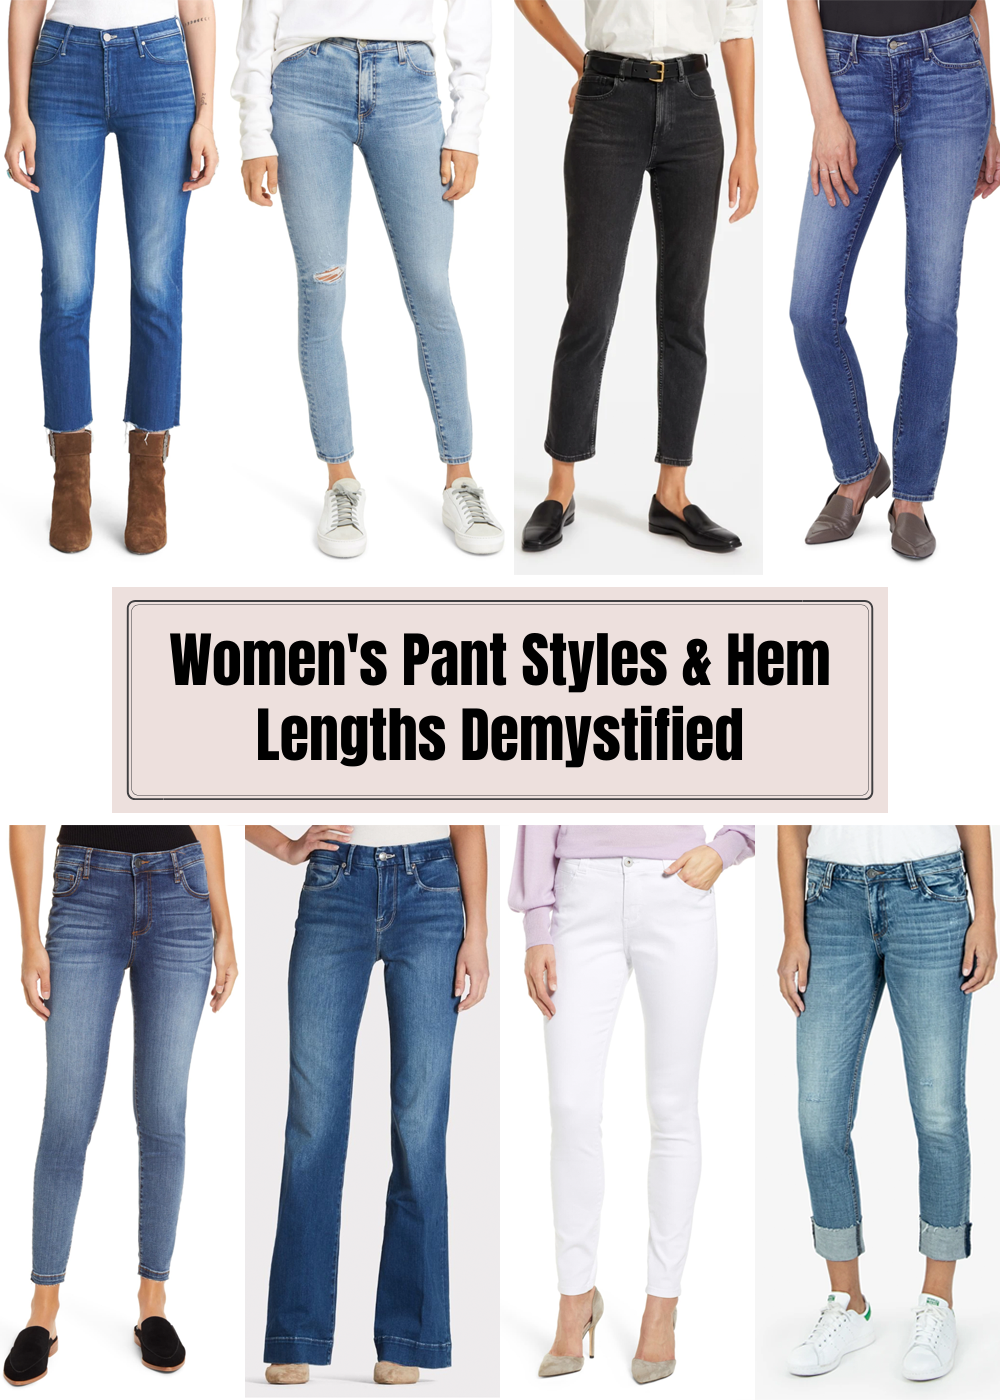 different jean styles